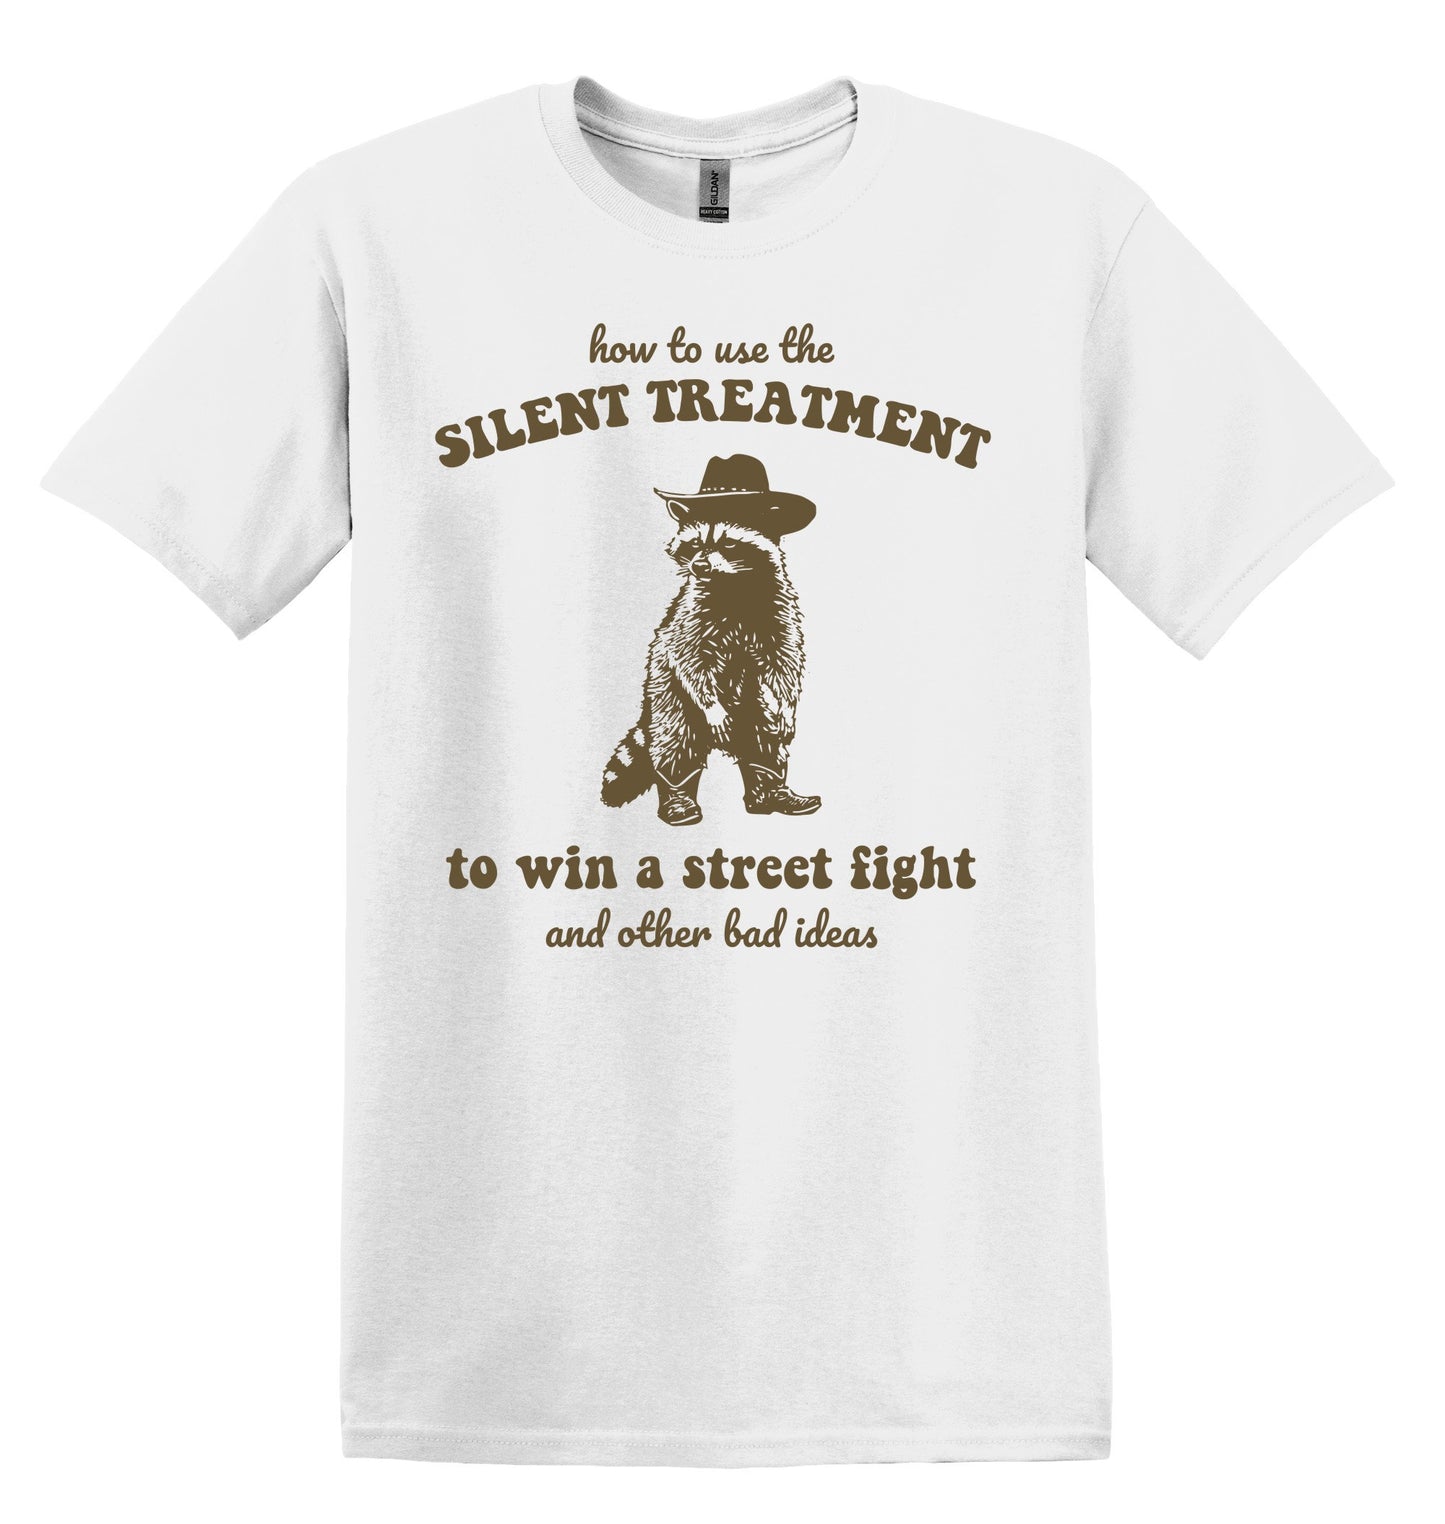 How to use the Silent Treatment to win a Street Fight Shirt - Funny Graphic Tee